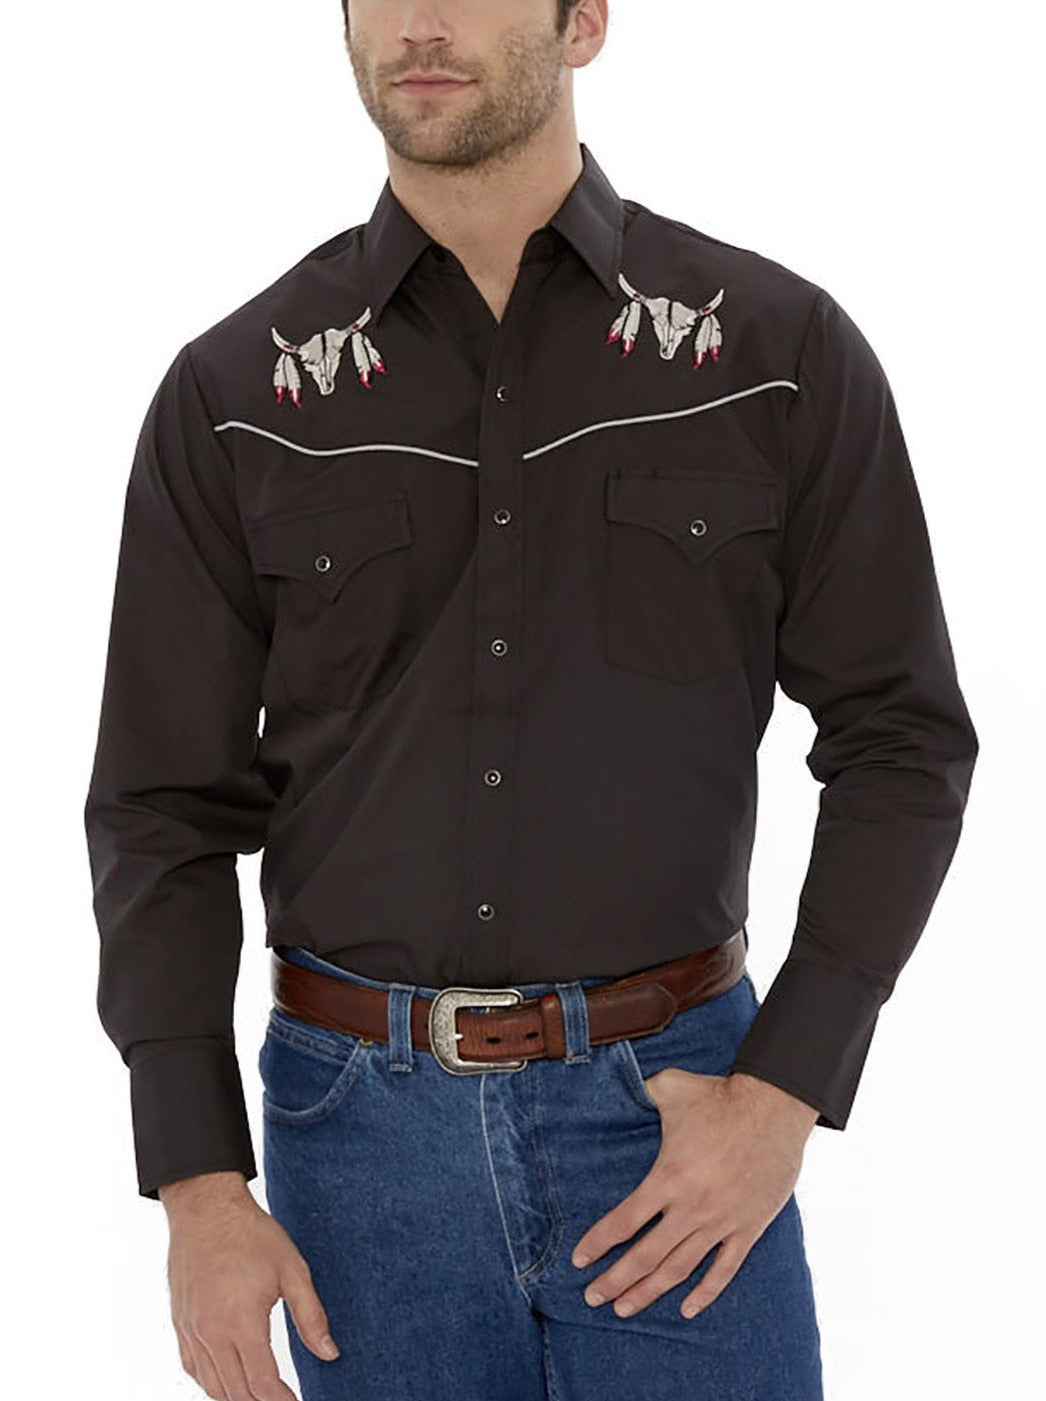 Men's Ely Cattleman Long Sleeve Western Snap Shirt with Rose Embroider